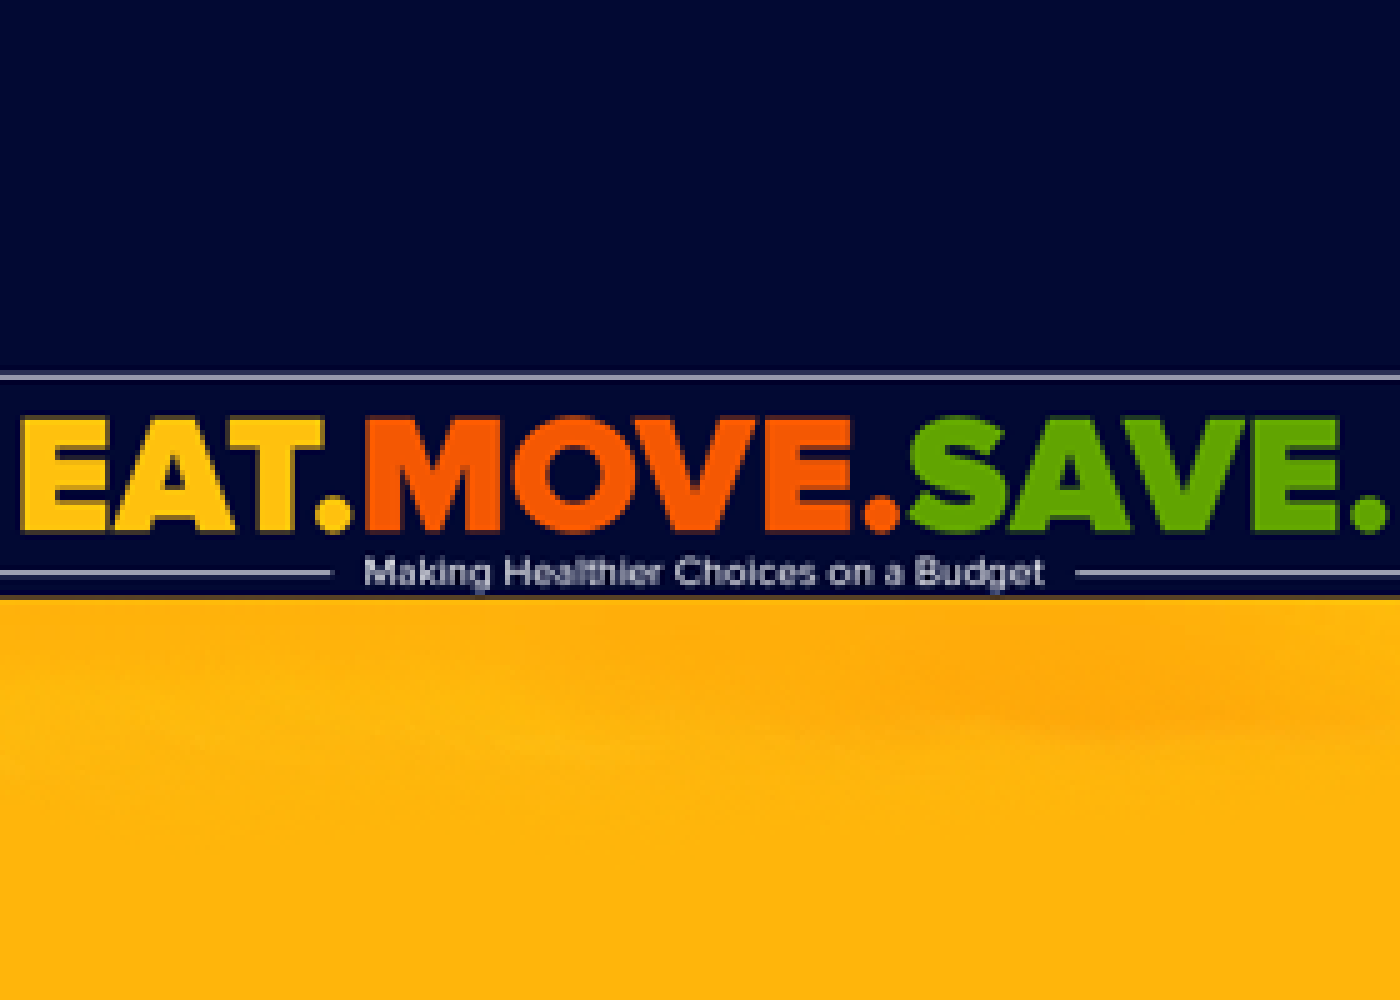 Eat. Move. Save. Making Helathier Choices on a Budget